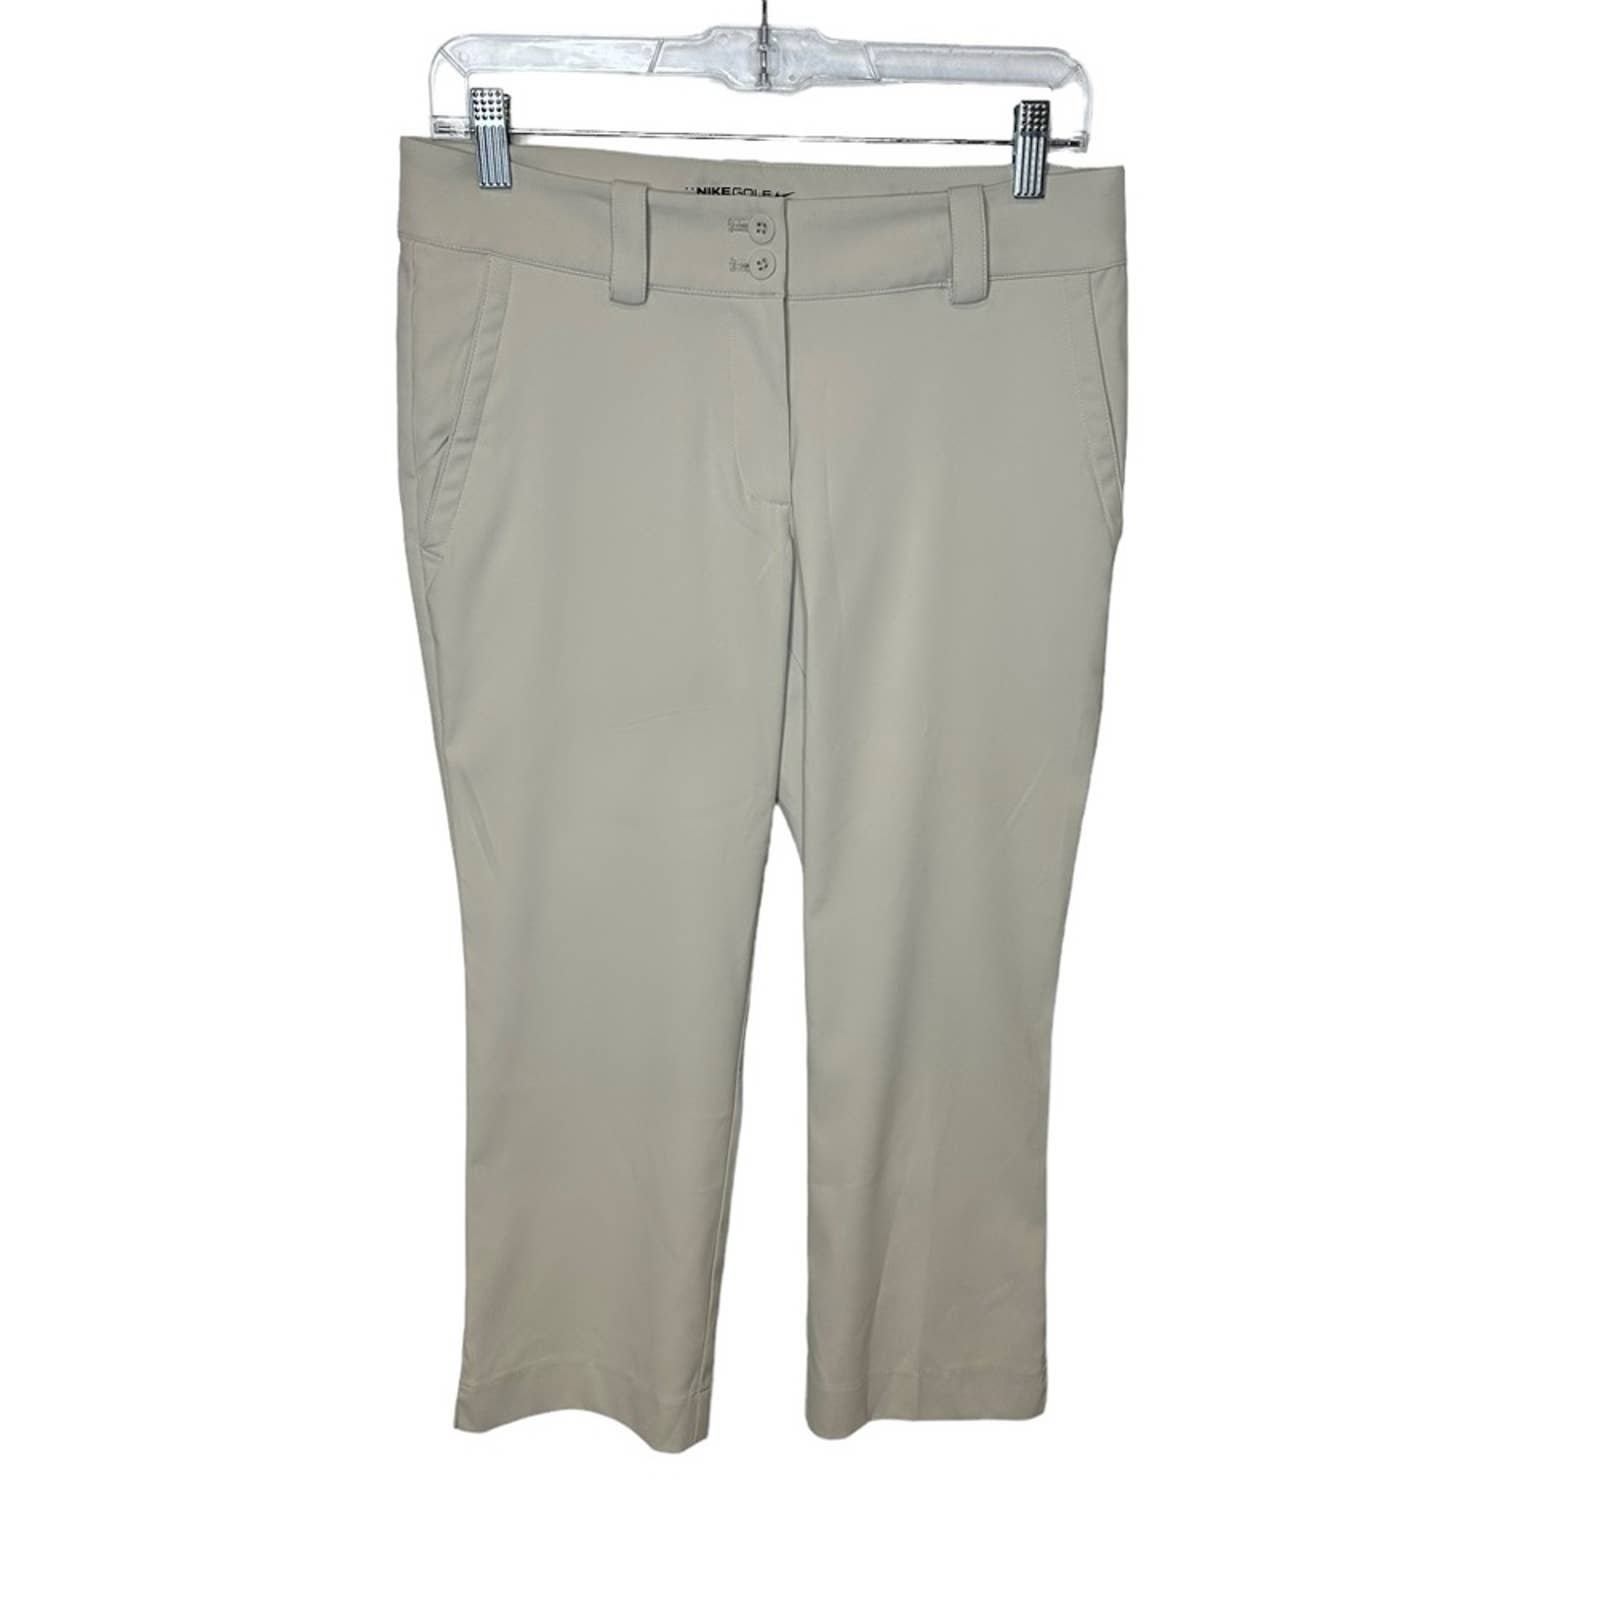 Authentic Nike Golf Tour Performance Dri-Fit Pants Womens Cropped Beige Trousers Gray 4 PgLGHE0vu Cheap